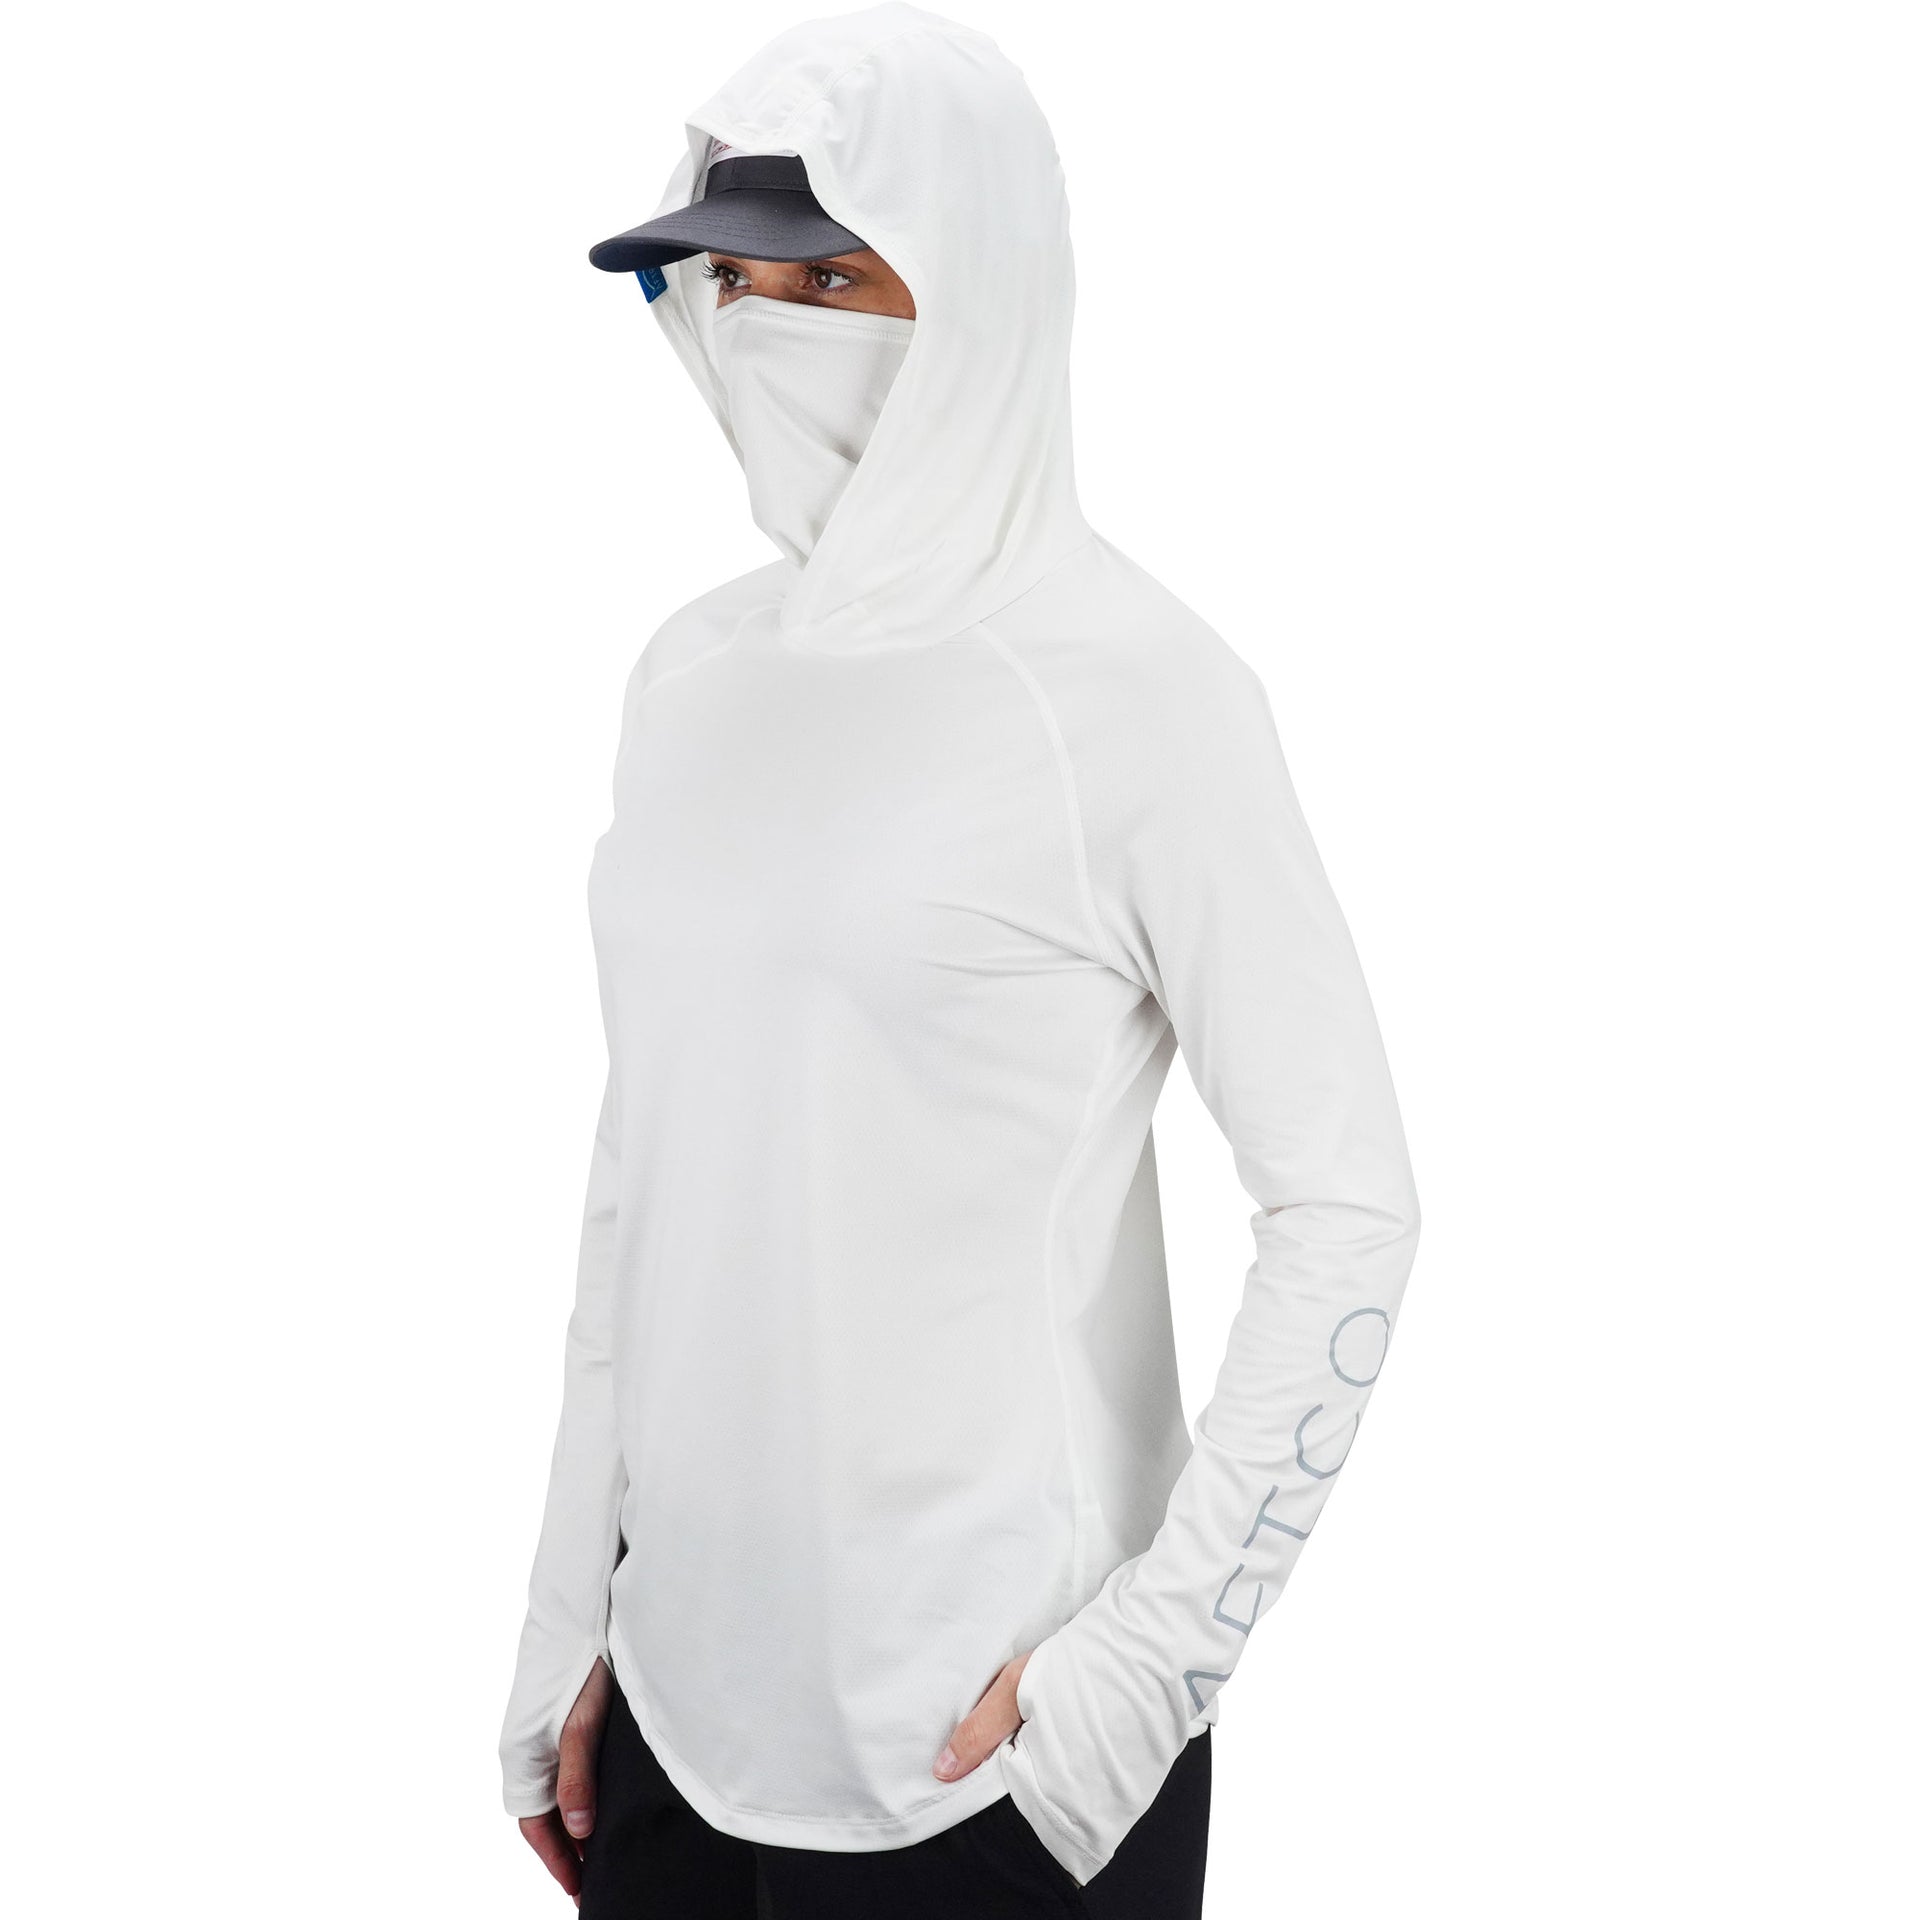 AFTCO Women's Yurei Hooded Performance Shirt - White - L